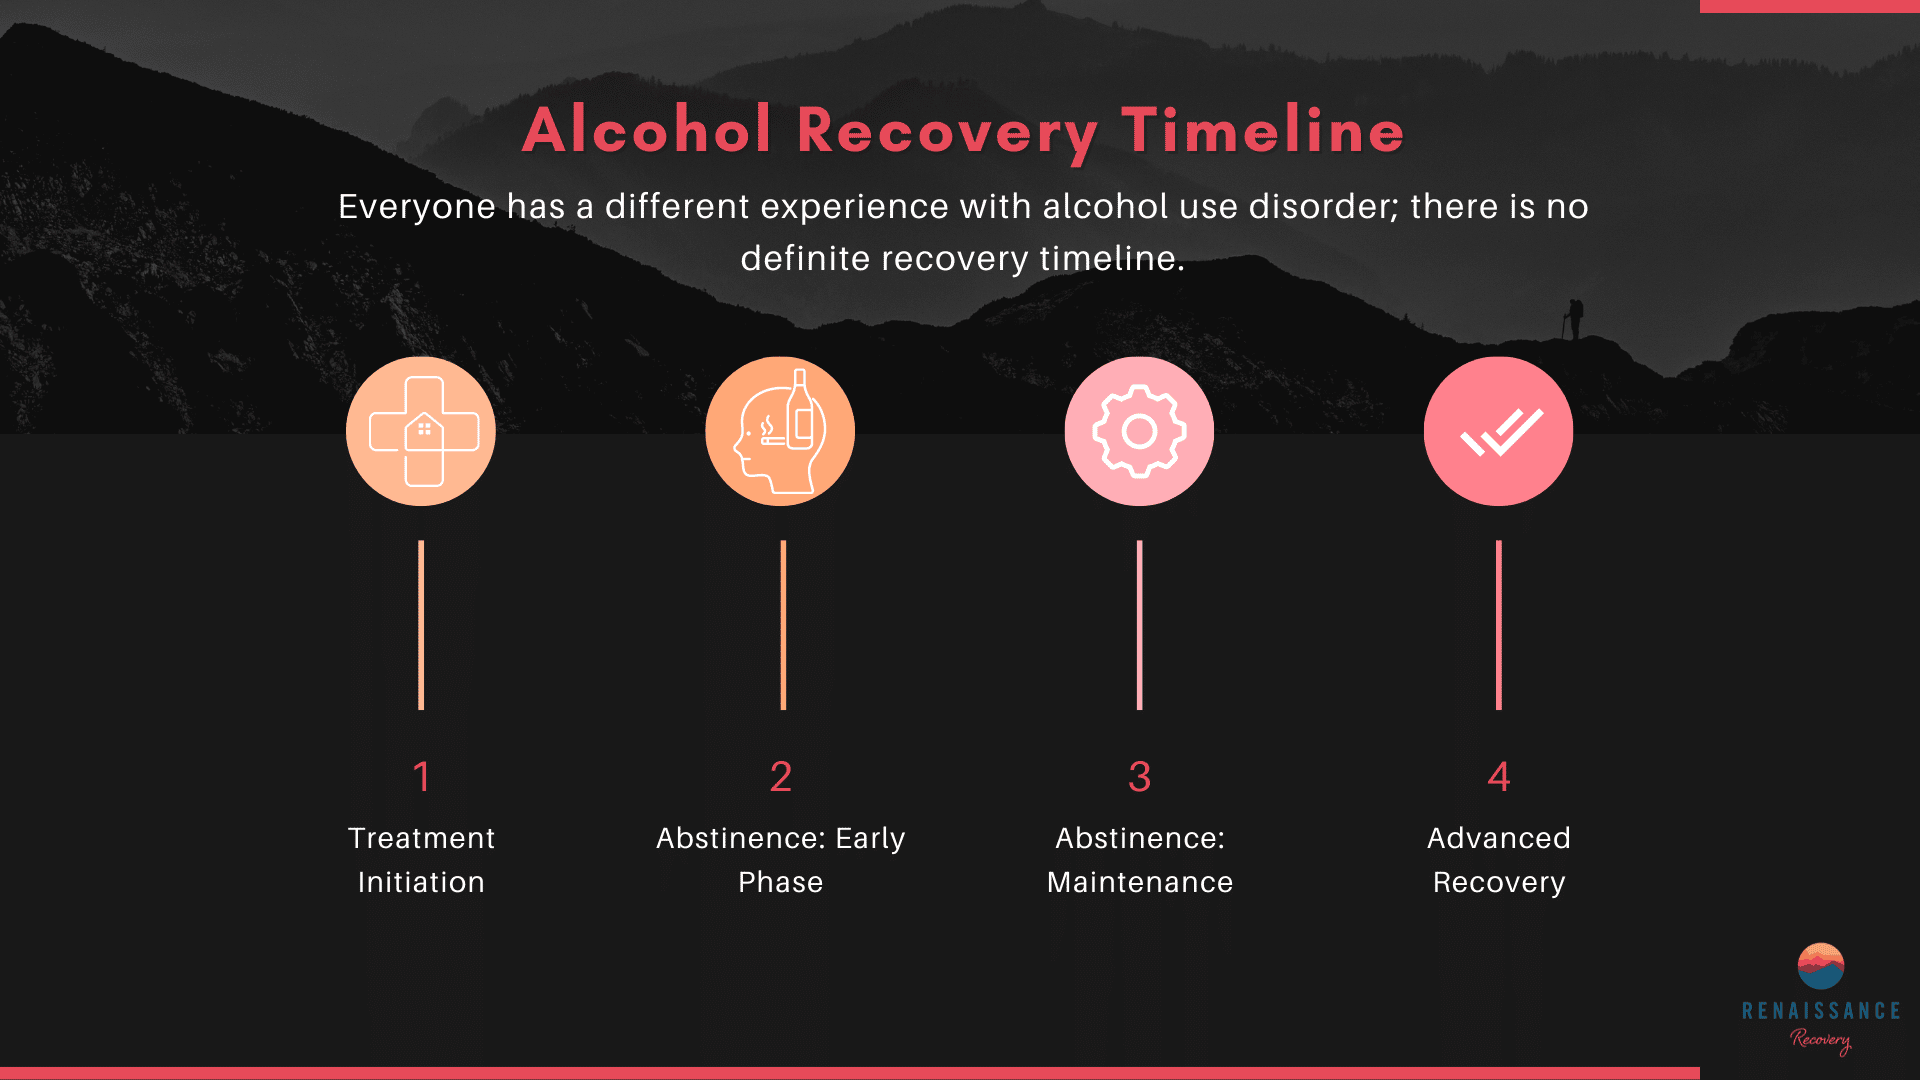 An infographic on the alcohol recovery timeline